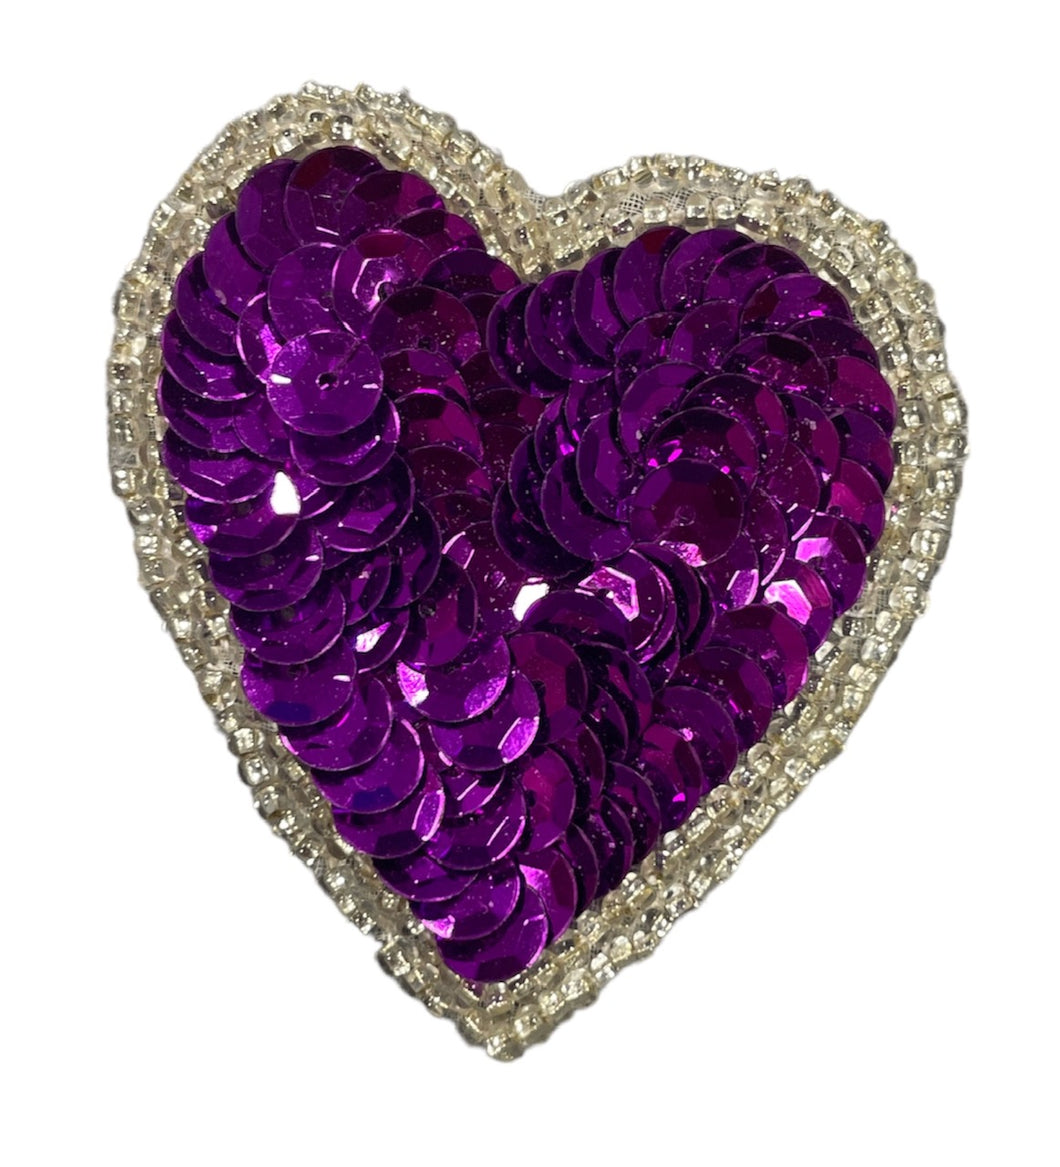 Heart with Dark Fuchsia Sequins with Silver Beads 2